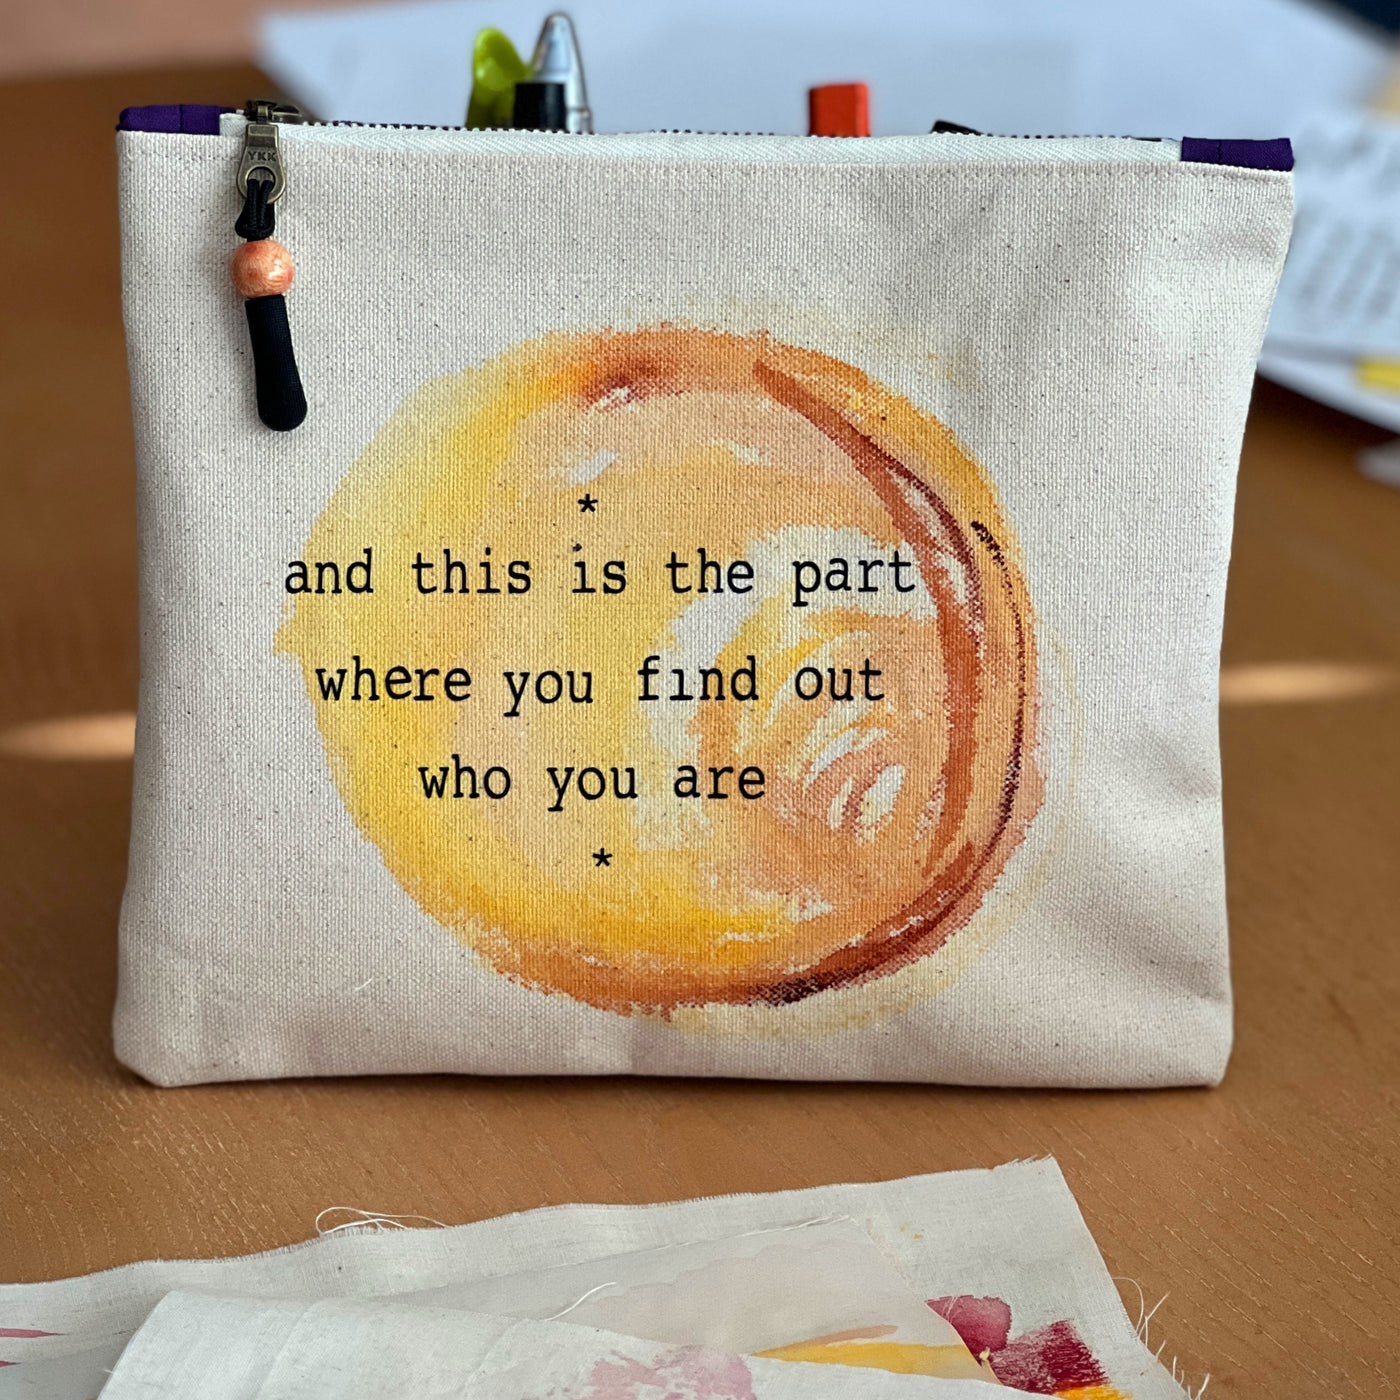 Mini canvas painted zip bag pouch - find out who you are